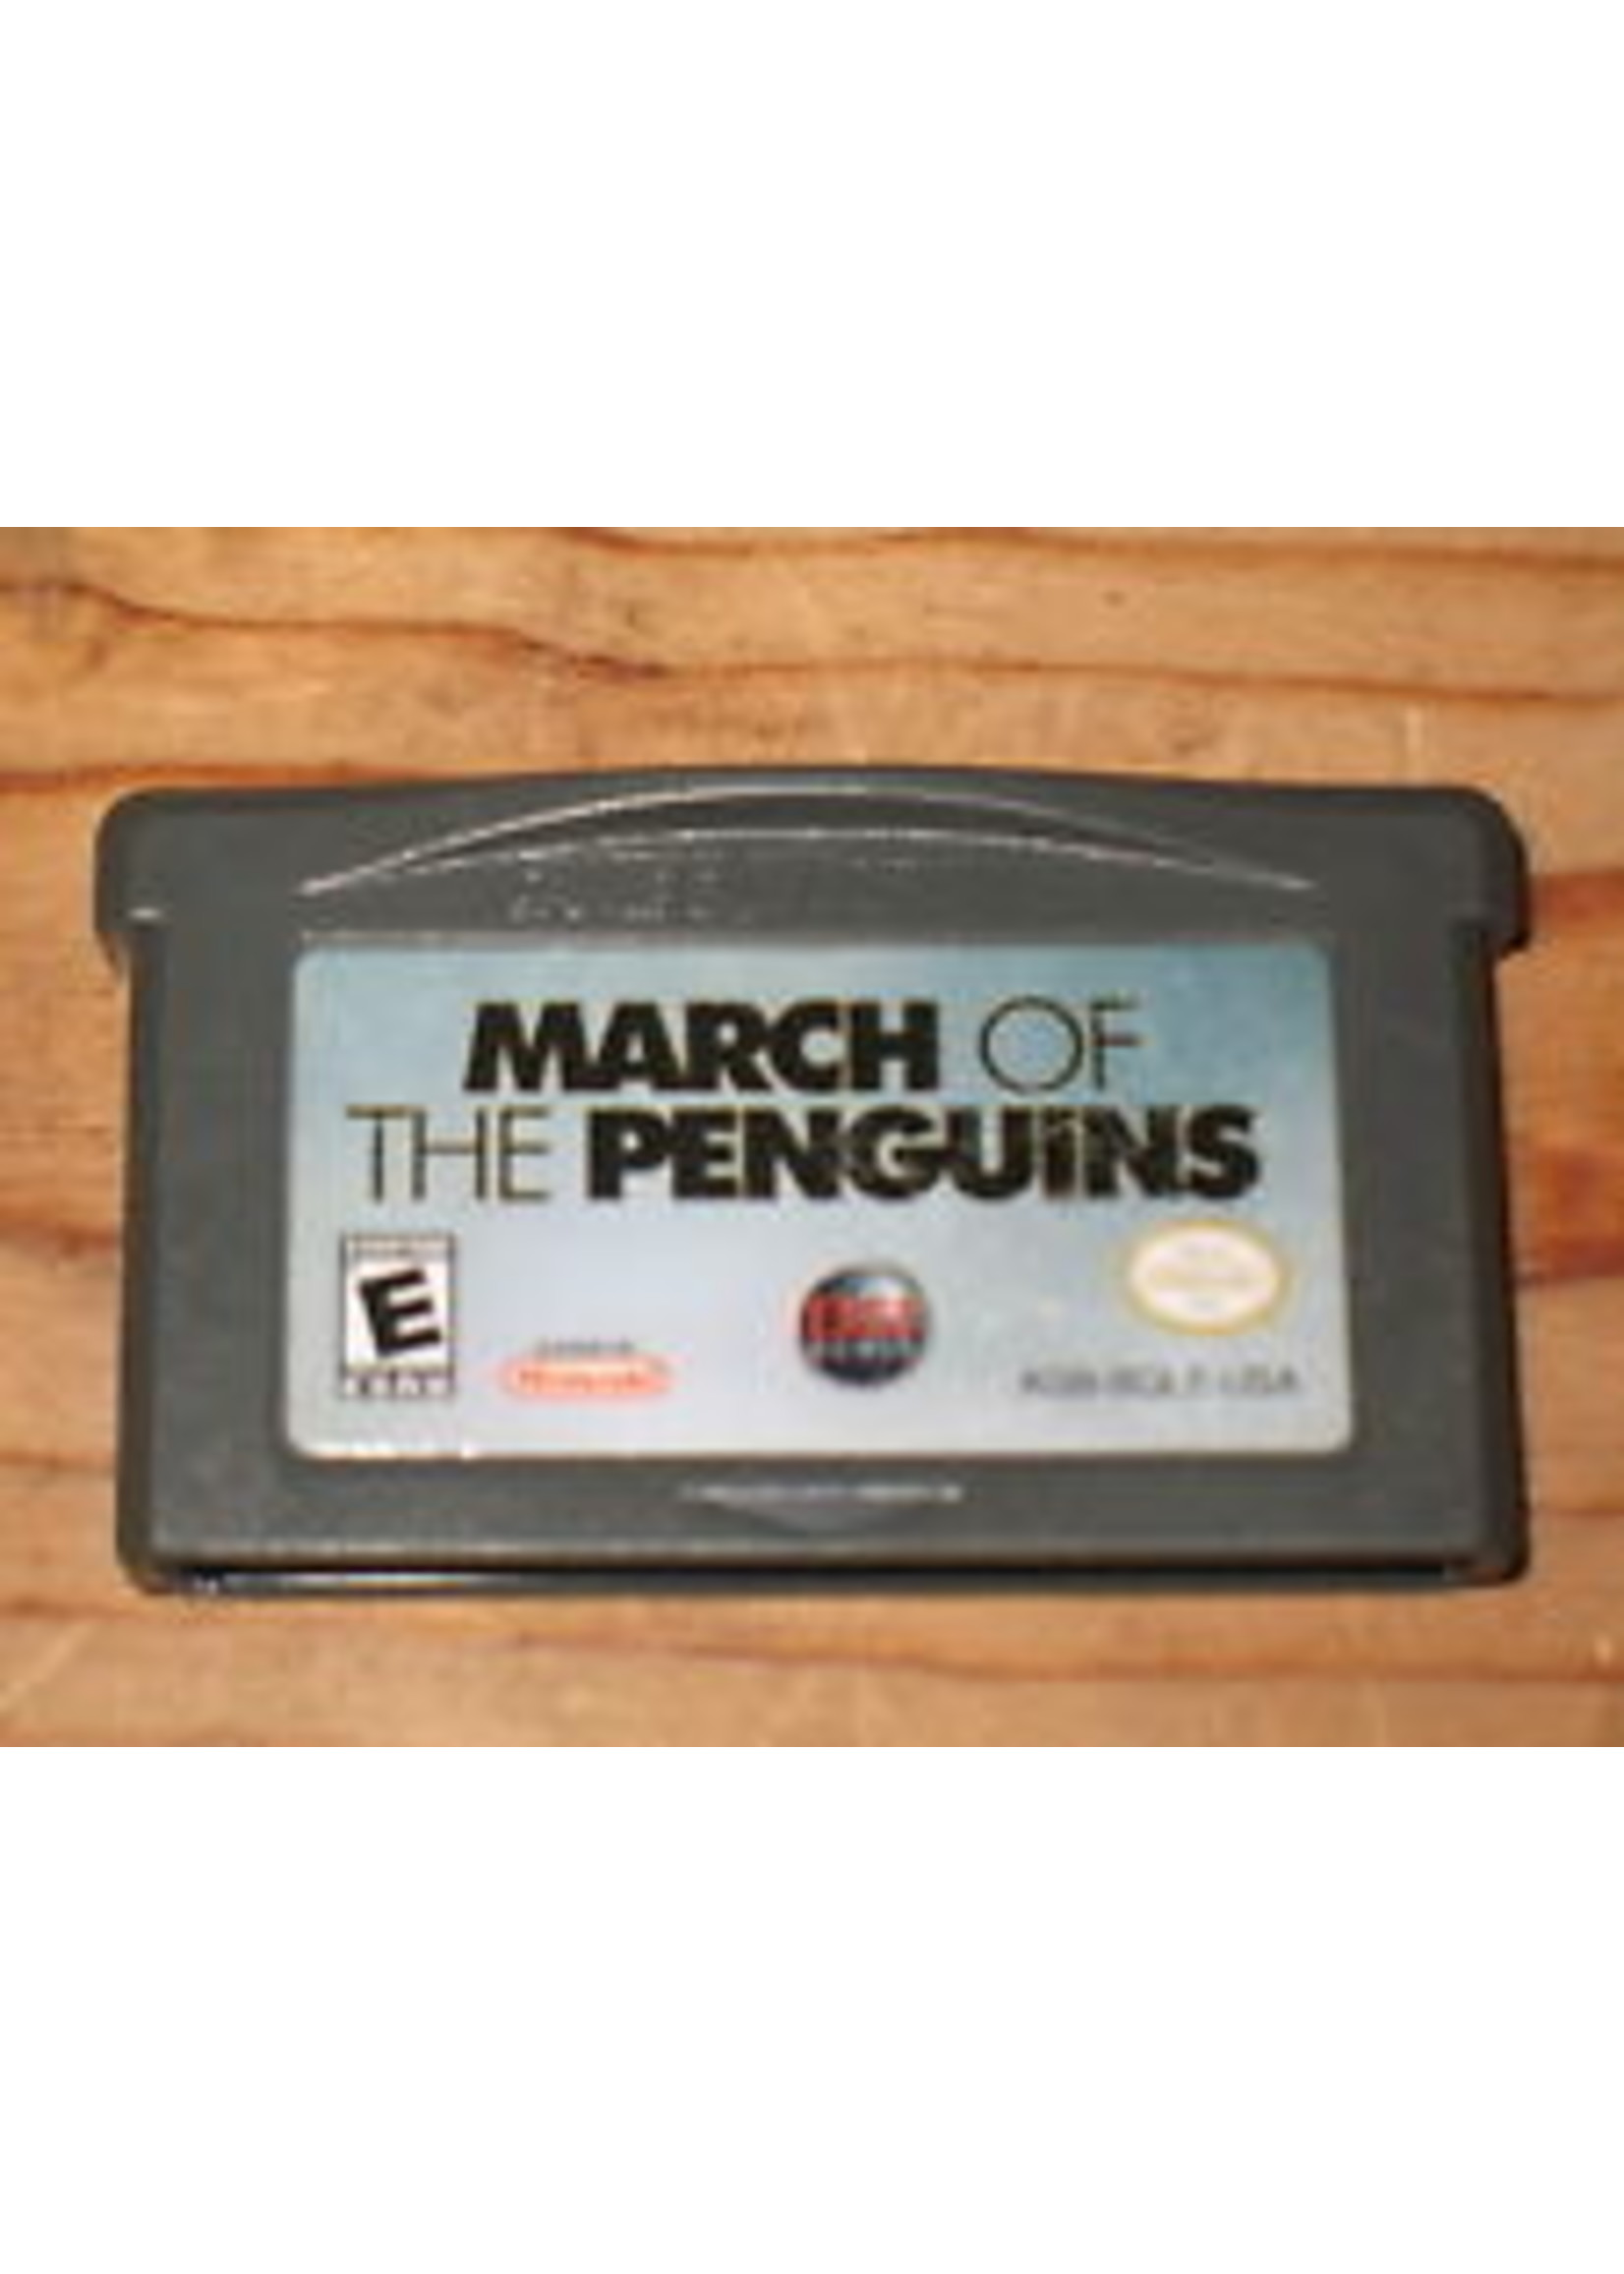 Nintendo Gameboy Advance March of the Penguins